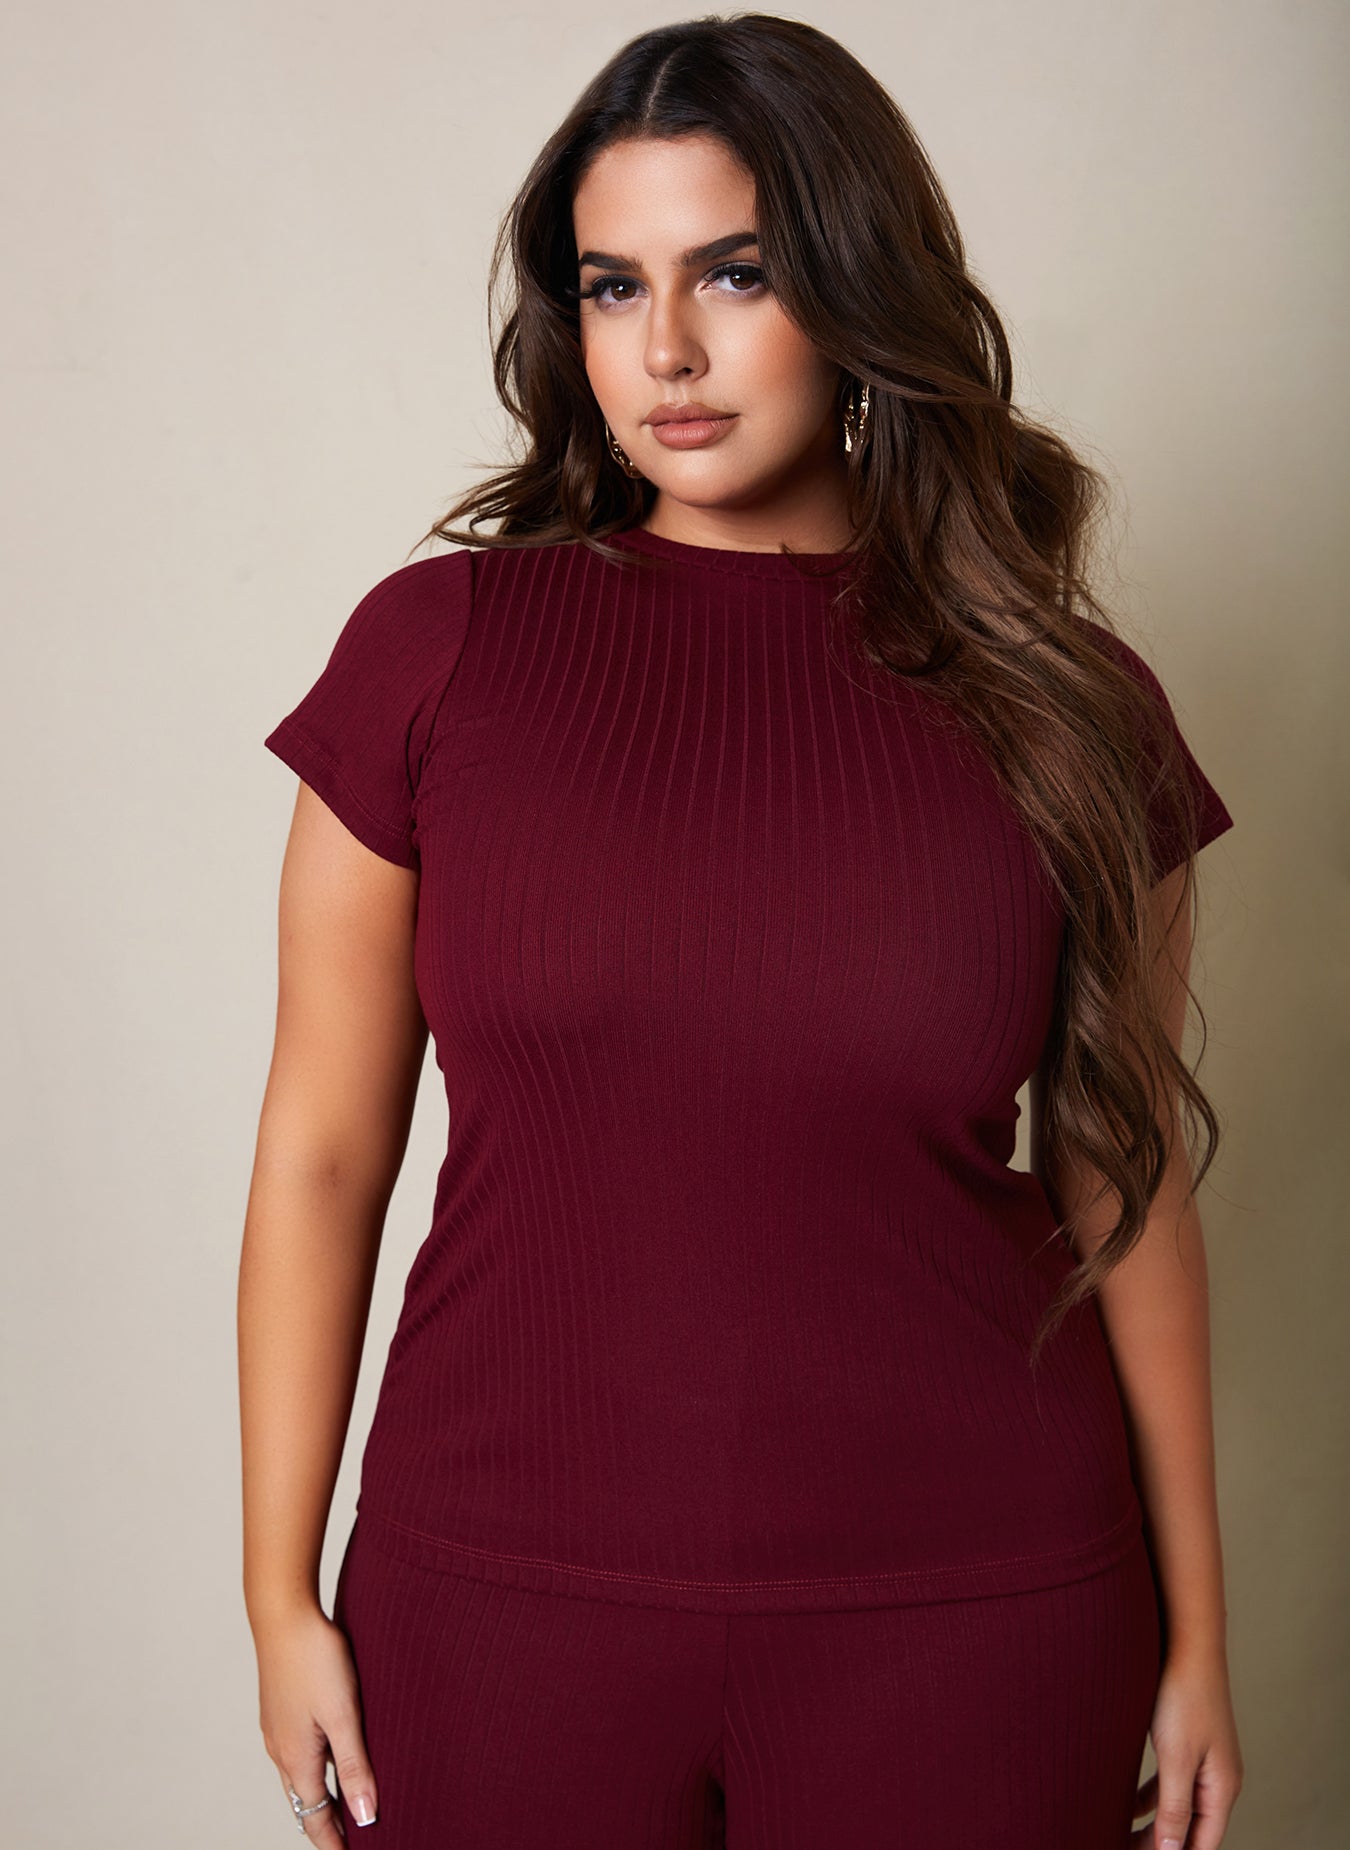 Girls Night In Ribbed Short Sleeve Top - Wine